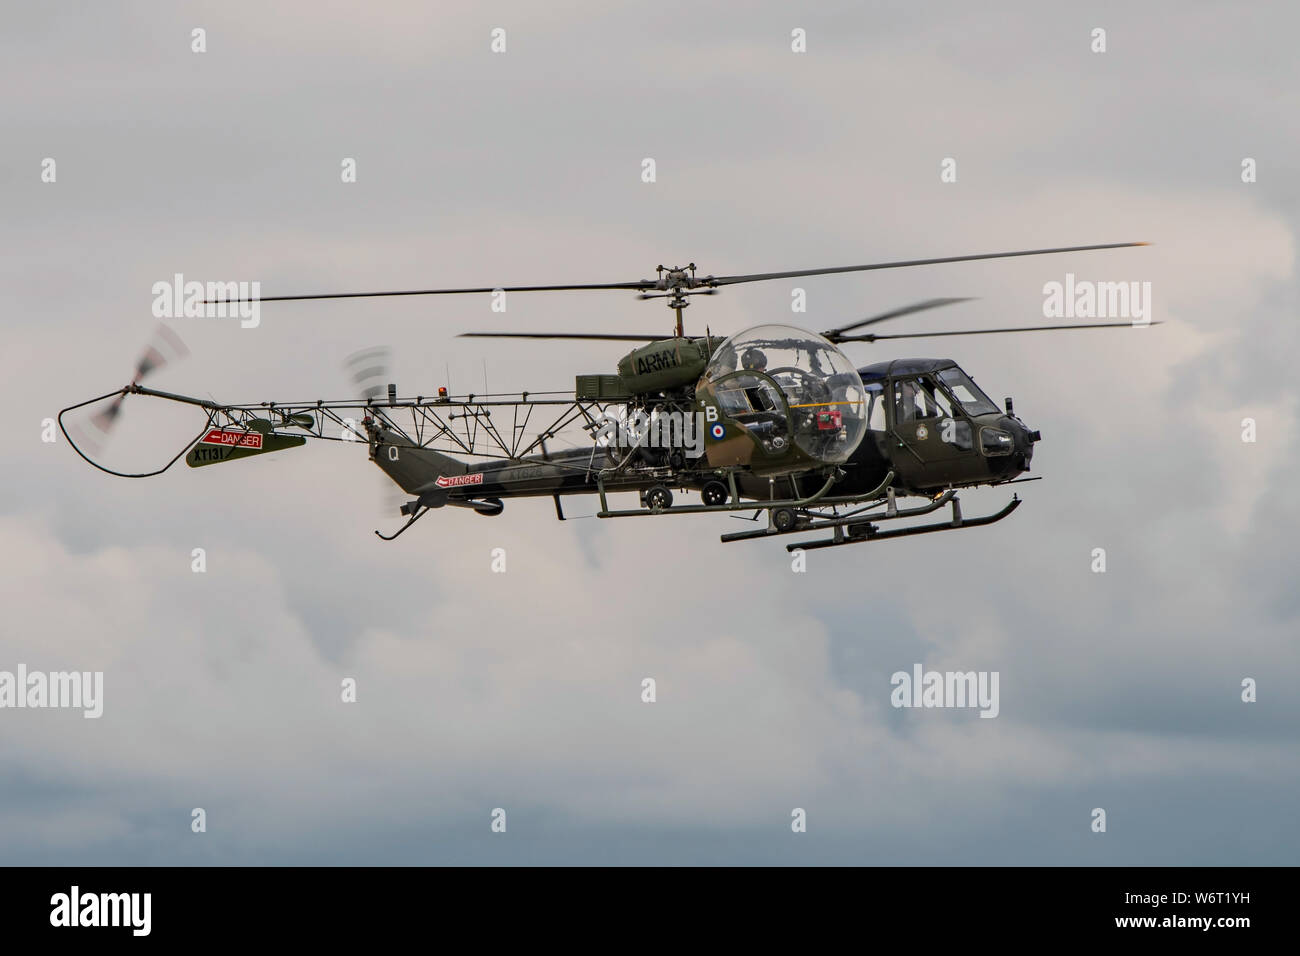 Two vintage British Army helicopters from the Historic Army Aircraft Flight flying in close formation at the RNAS Yeovilton, UK Air Day on 13/7/19. Stock Photo